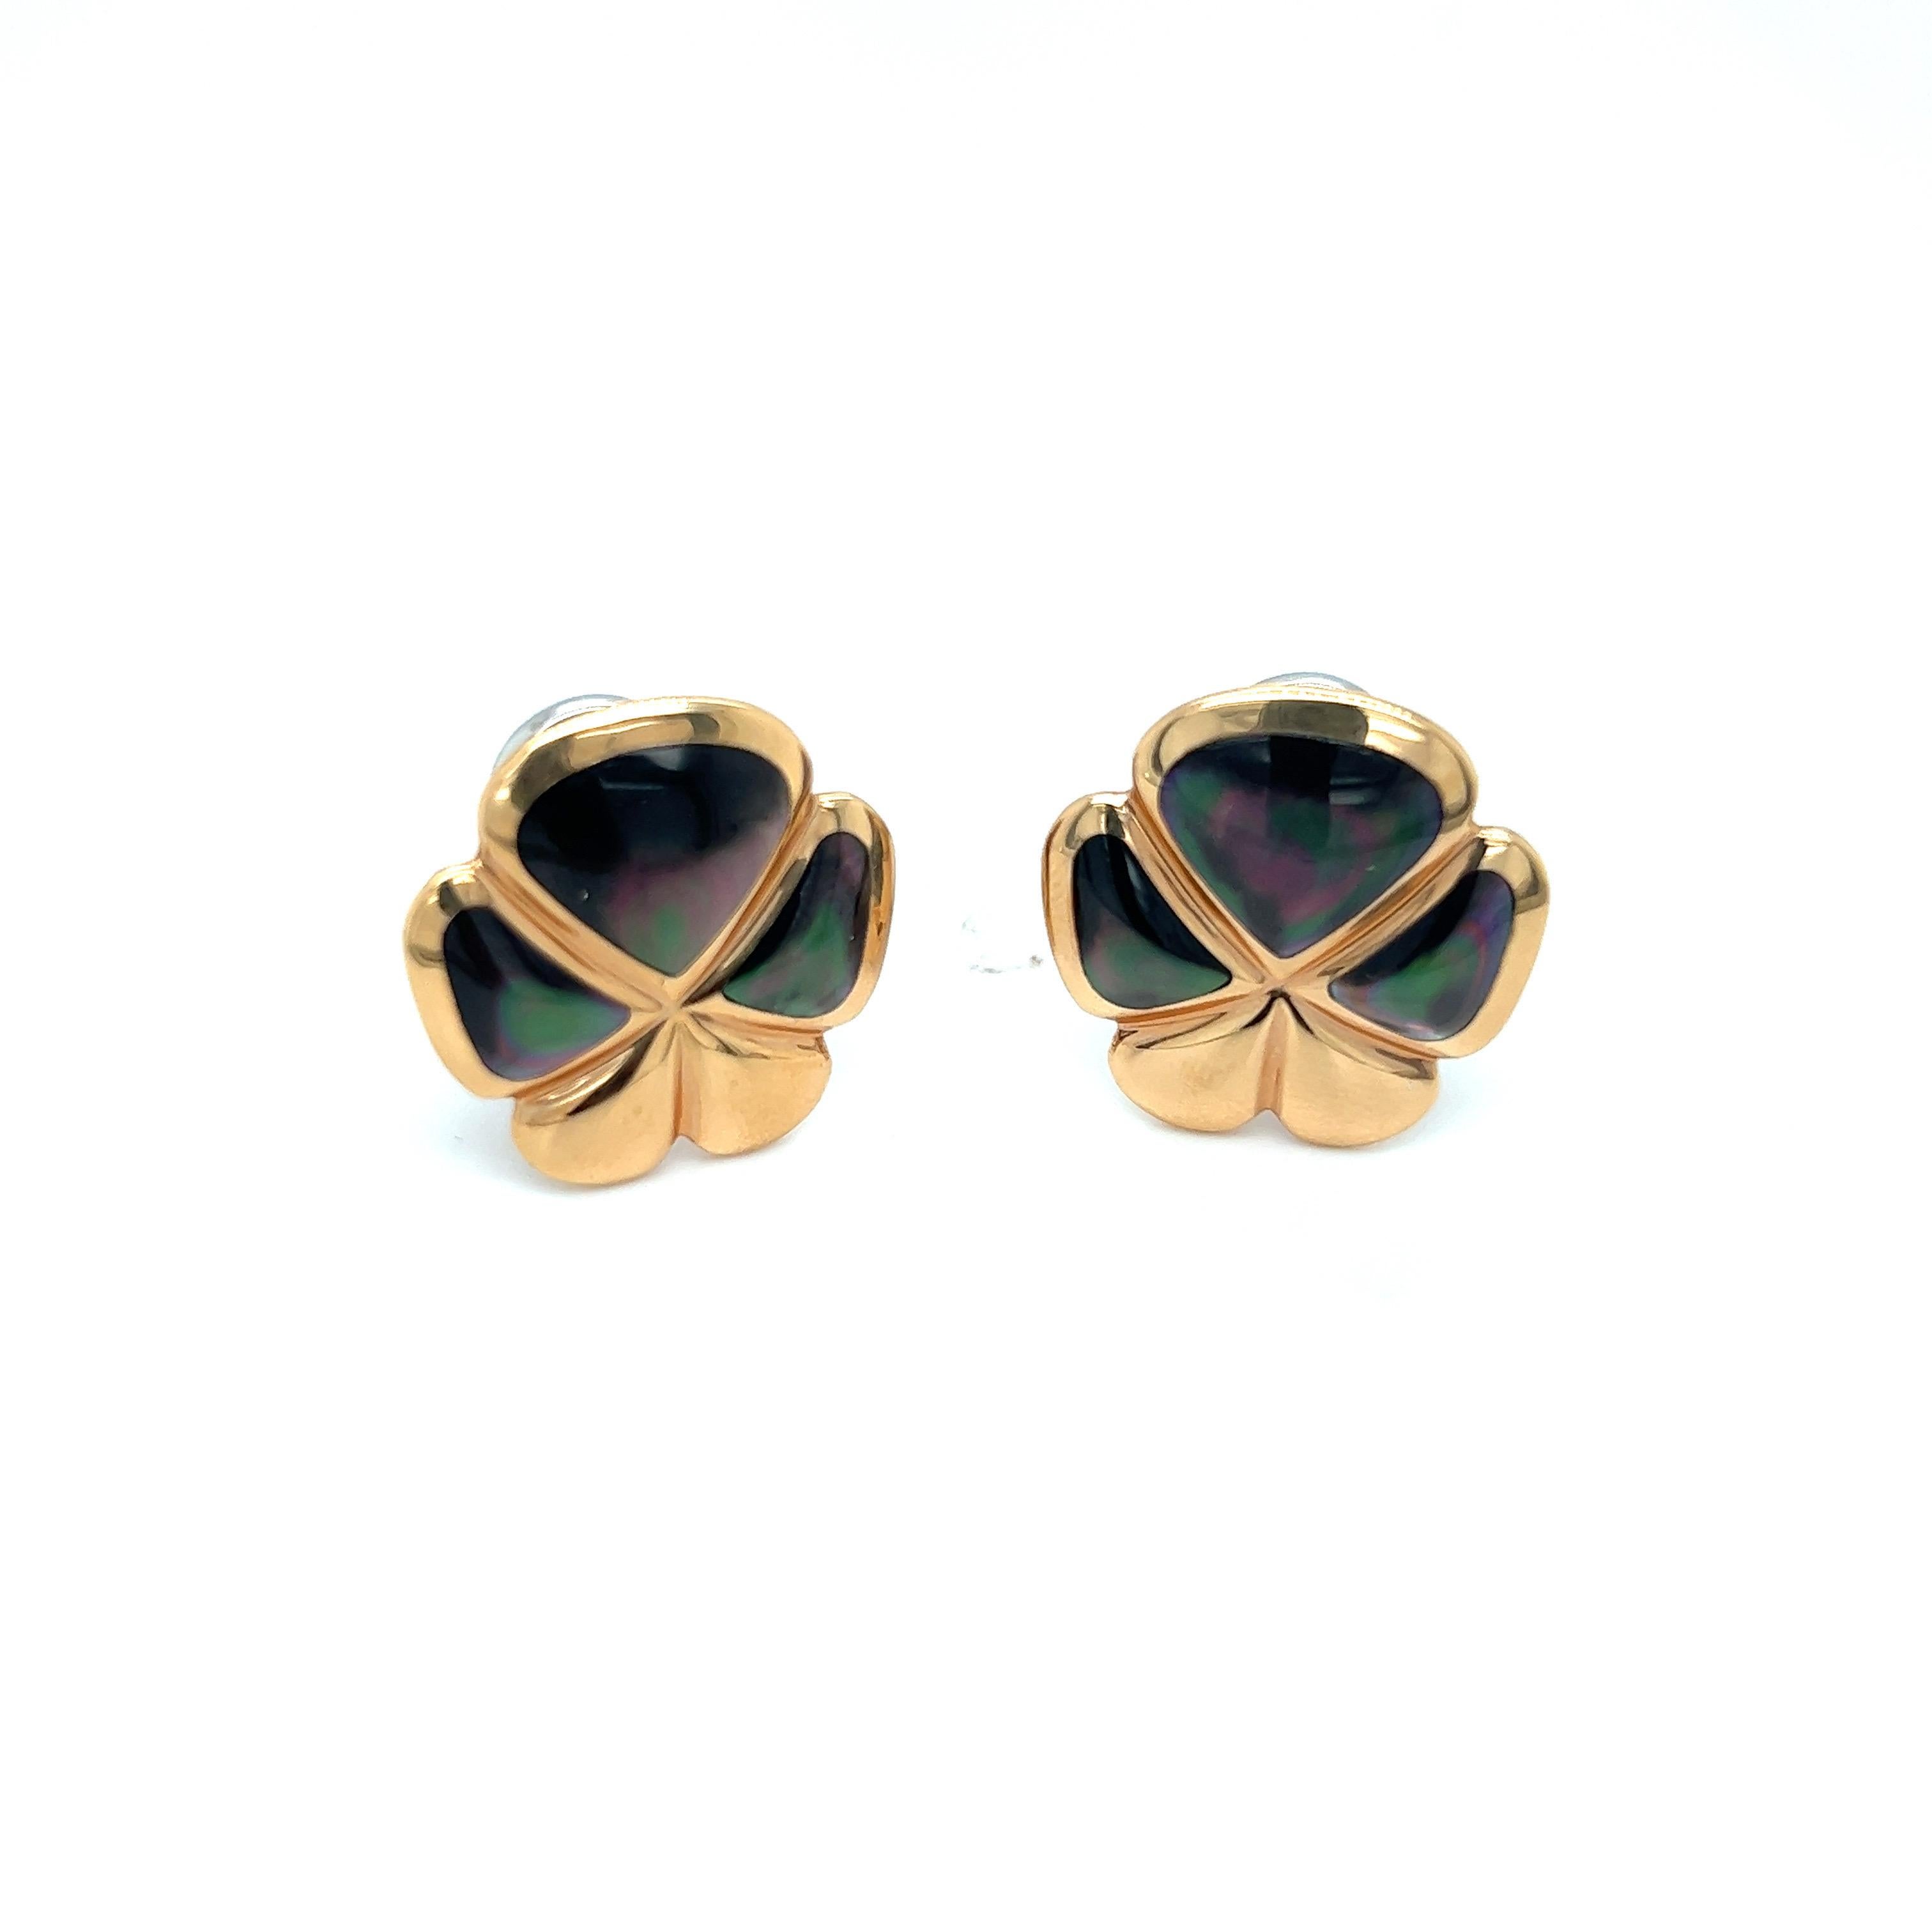 Created by famed Italian Jewelers, De AMBROSI, exclusively for Cellini Jewelers these lucky 5 leaf clover earrings are inlaid with black mother of pearl in 18-karat rose gold.
The earrings are pierced with Omega backs. They have collapsible posts